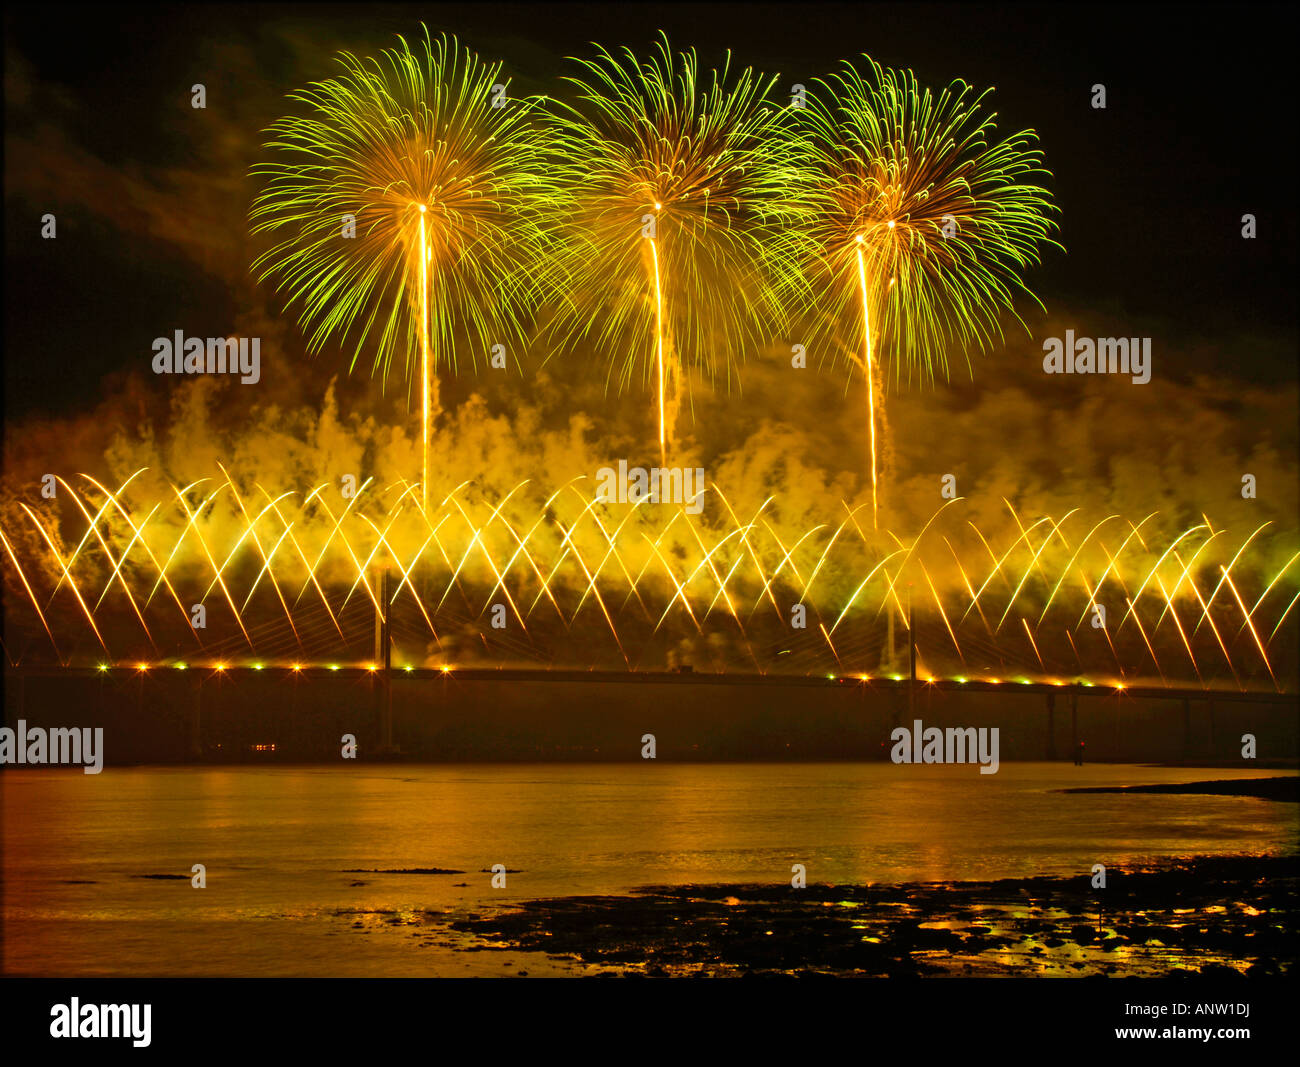 Fireworks display on Kessock Bridge Inverness above the Moray Firth Stock Photo